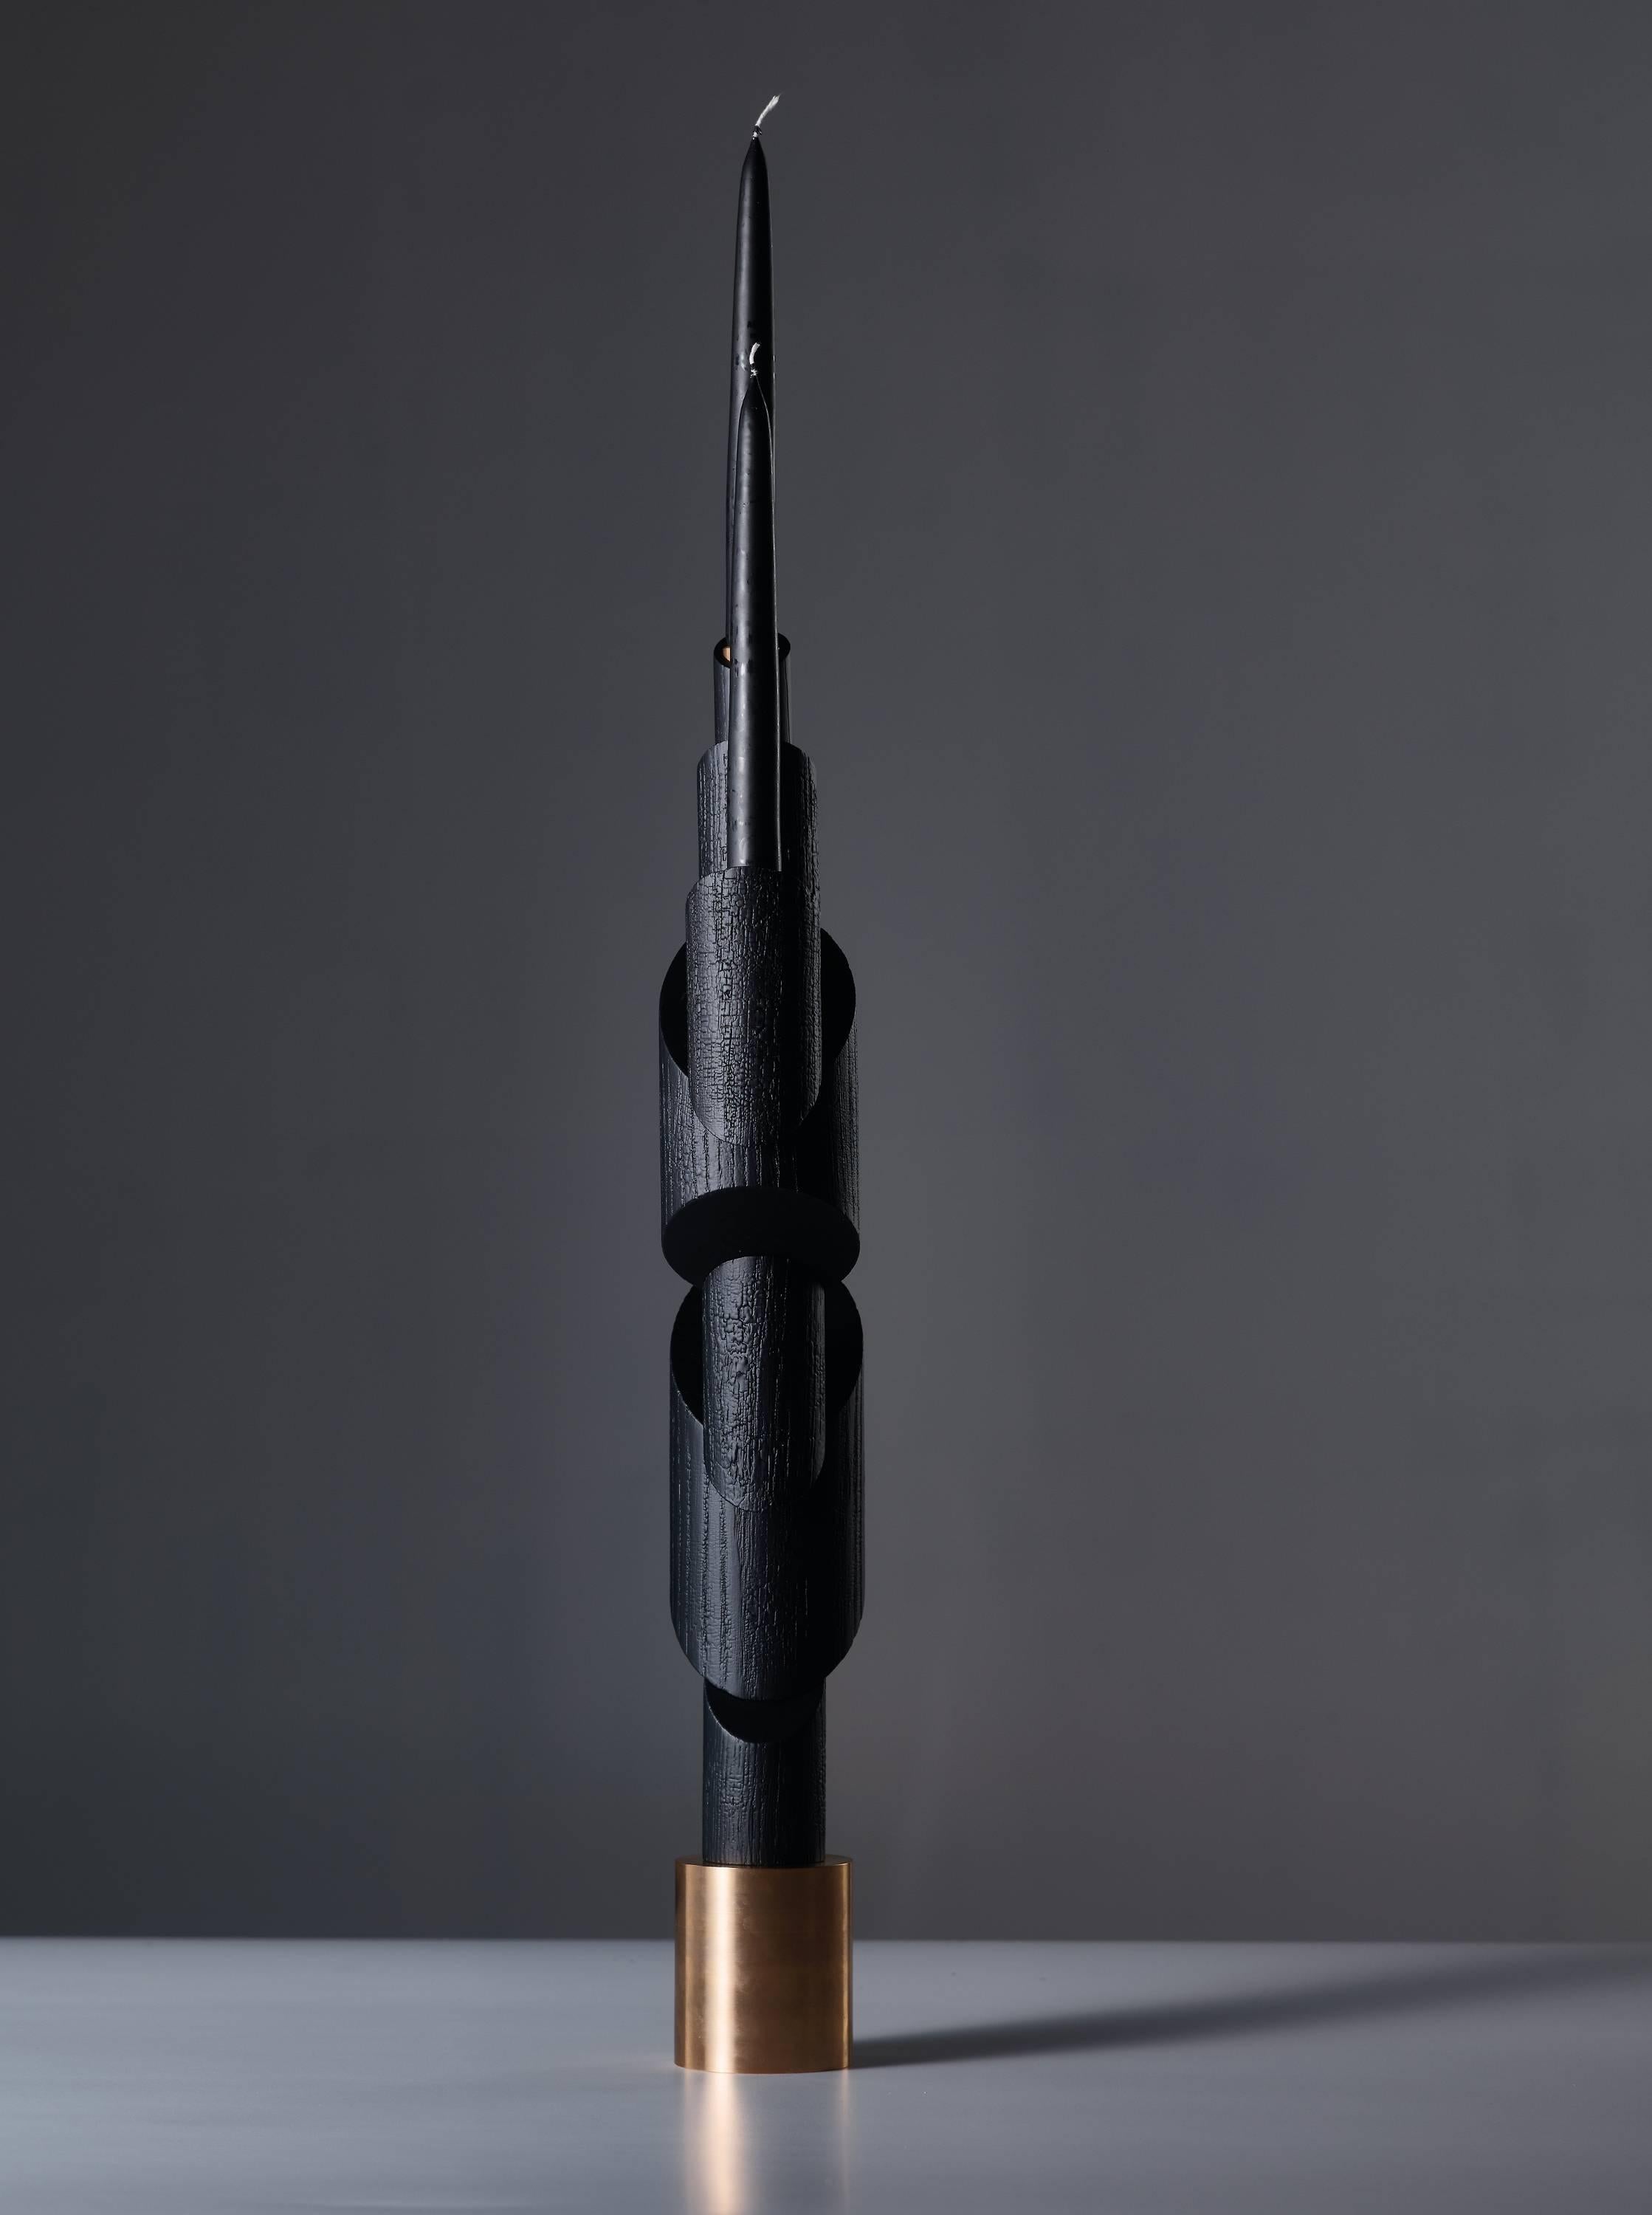 Ashes to Ashes B1, bronze chandelier signed by William Guillon
Signed William Guillon
Limited edition of 99
Signed and numbered
Solid burnt oak / Solid bronze
Dimensions: 65 x 19.7 x 9 cm (Height with candle: 88 cm) 
Hand-sculpted in